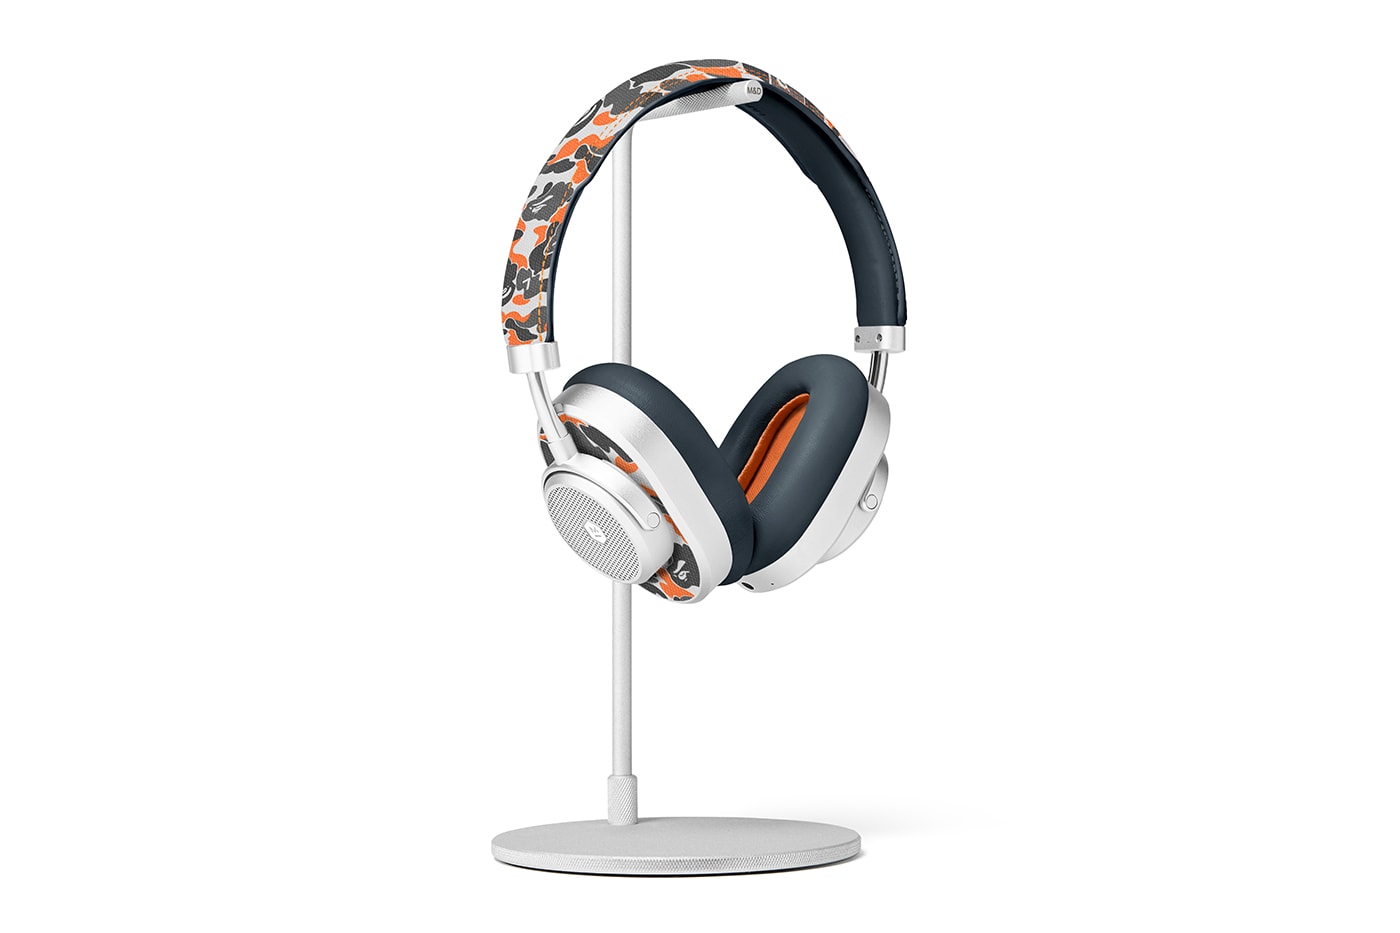 BAPE Joins Master & Dynamic for Camo-Covered Headphones MW07 PLUS True Wireless Earphones MW65 Wireless Active Noise-Cancelling Headphones Kevin Durant